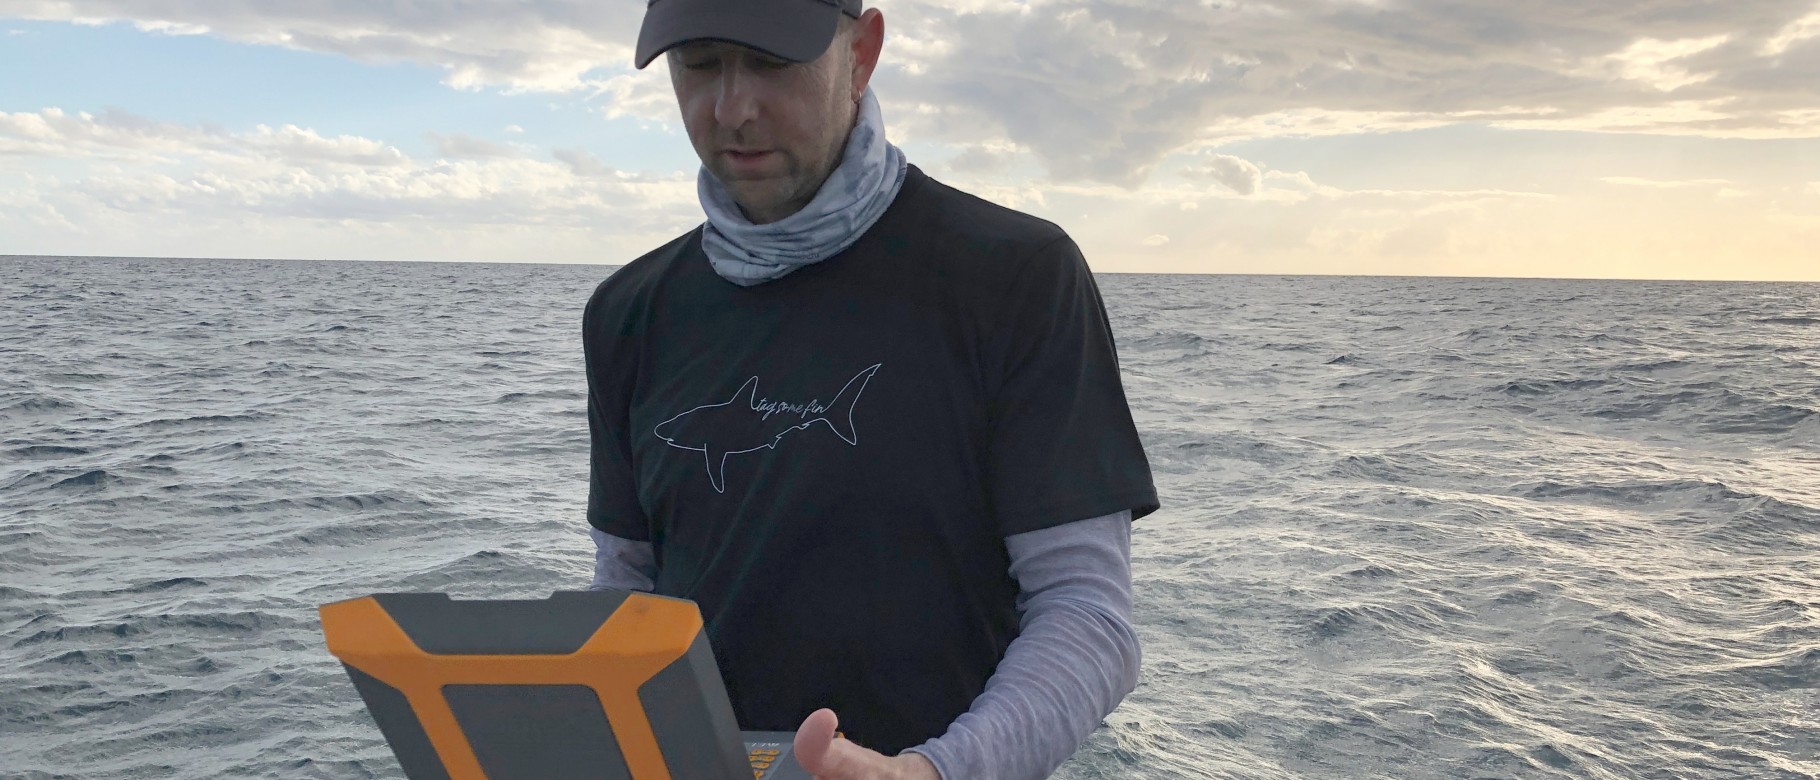 James Sulikowski is using trackers called Birth-Tags to learn where sharks give birth